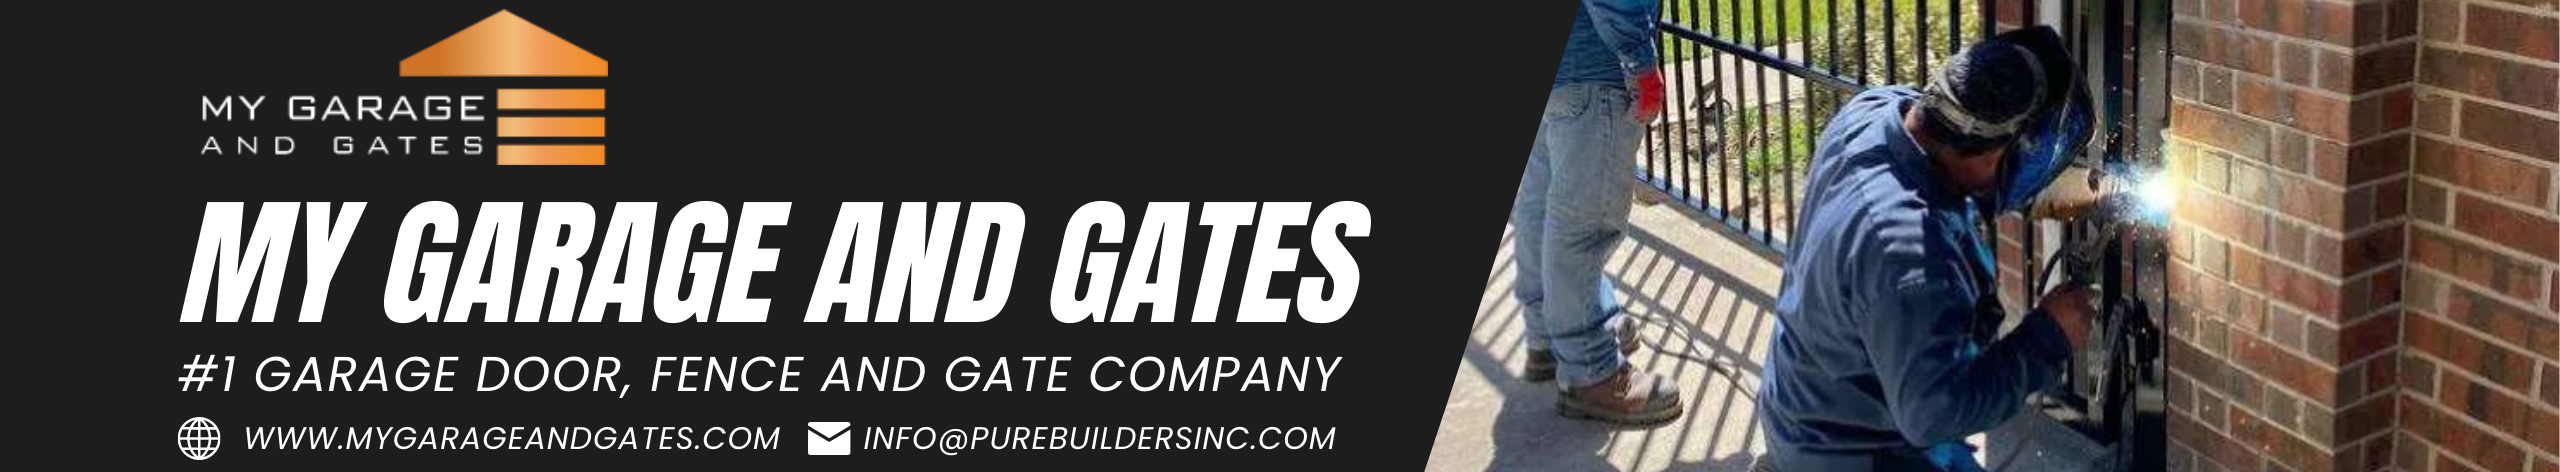 My Garage And Gates TX's profile banner